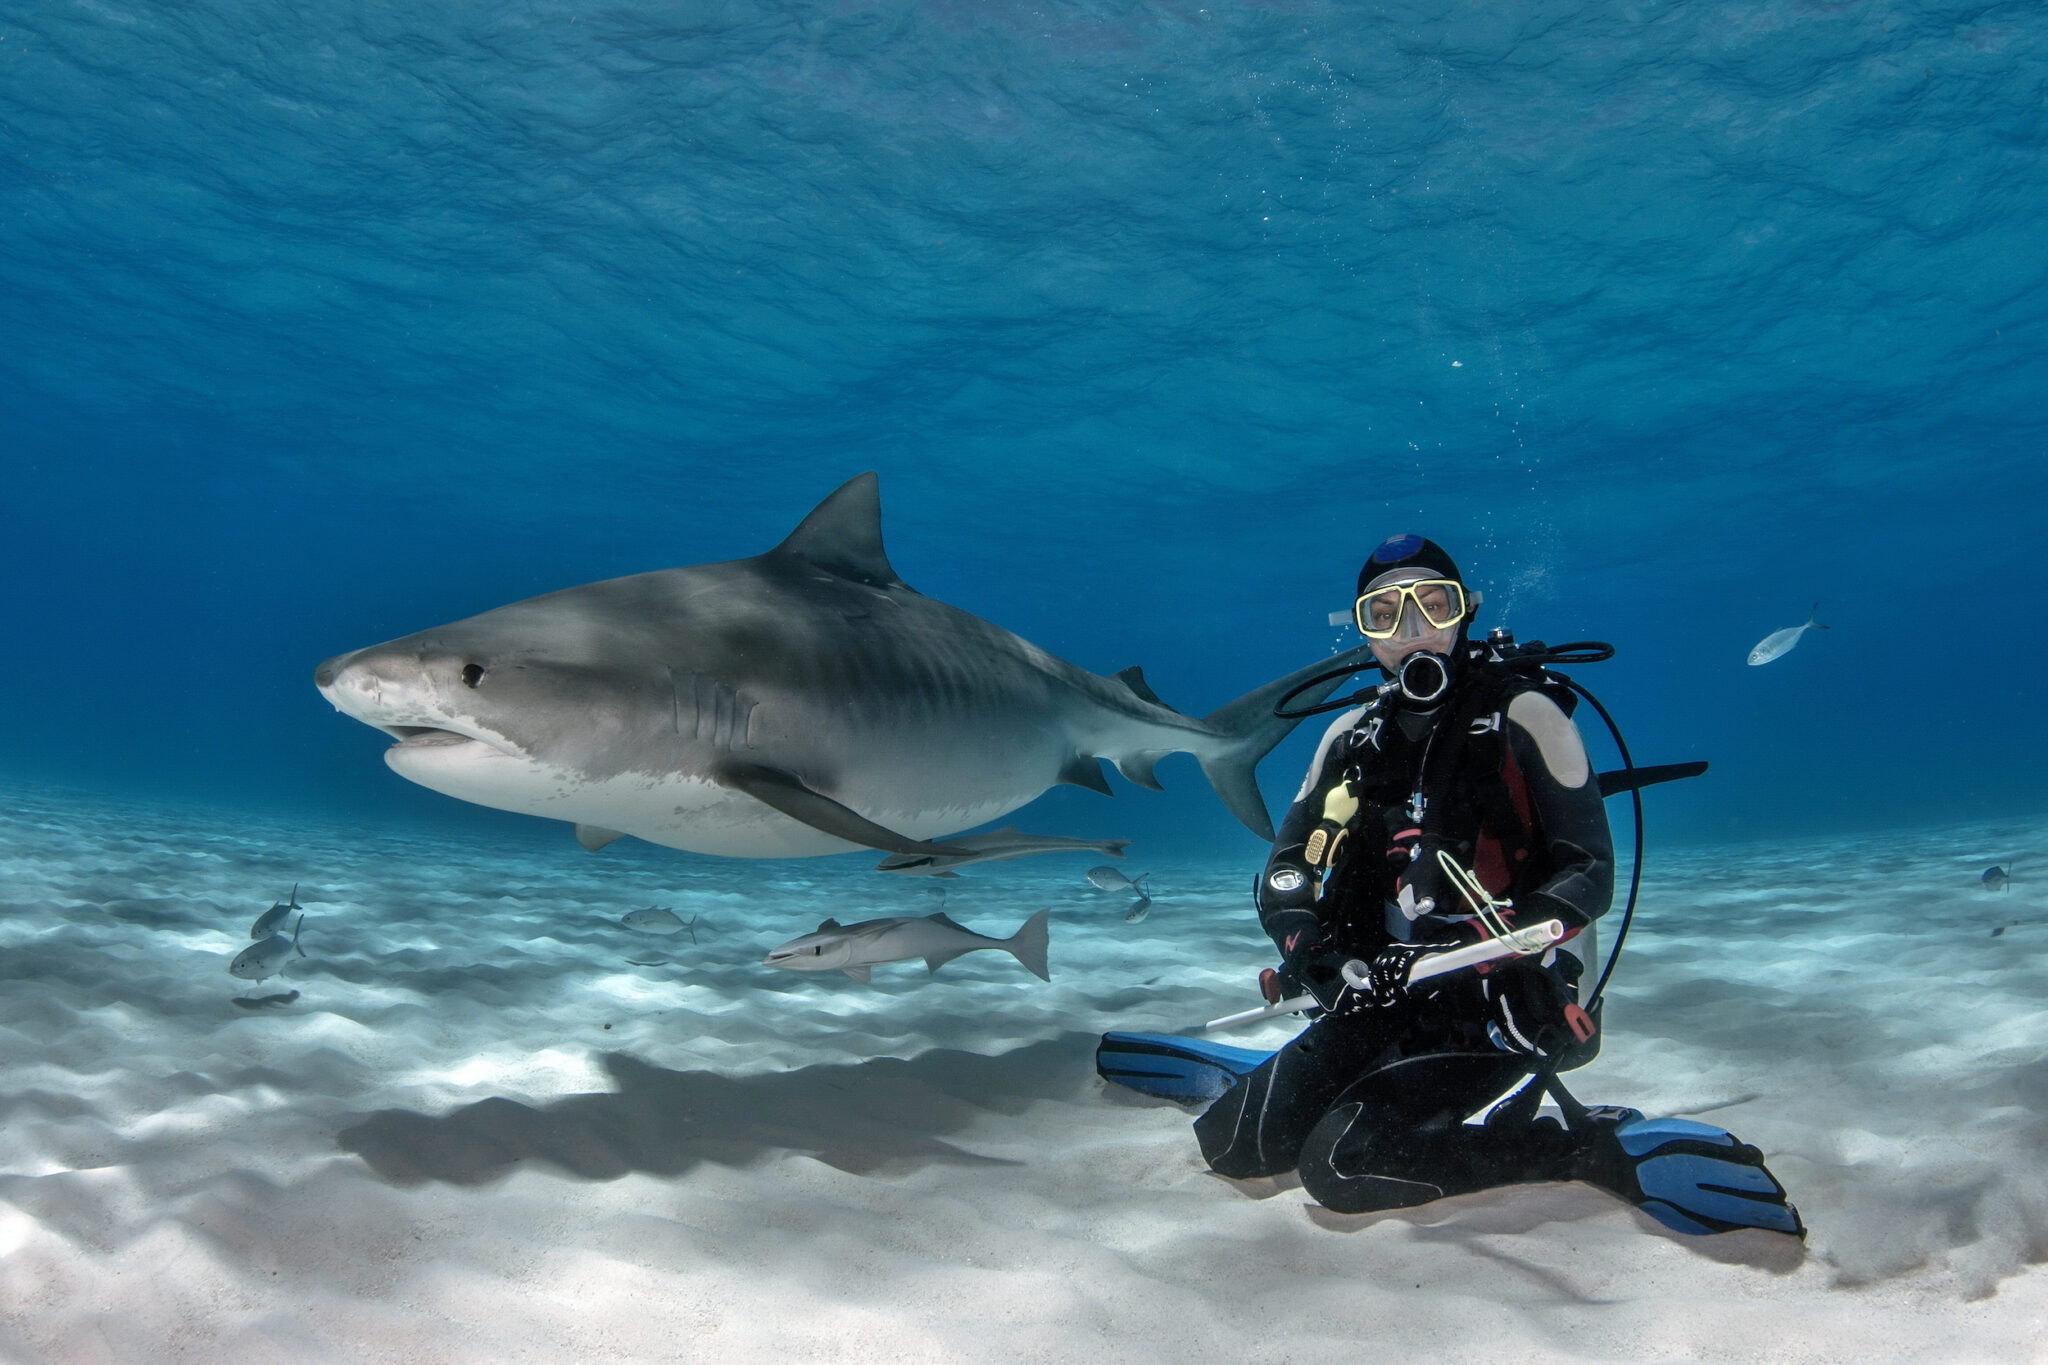 A tiger shark swimming past a scuba diver at Tiger Beach, where you can find some of the best scuba diving in the Caribbean